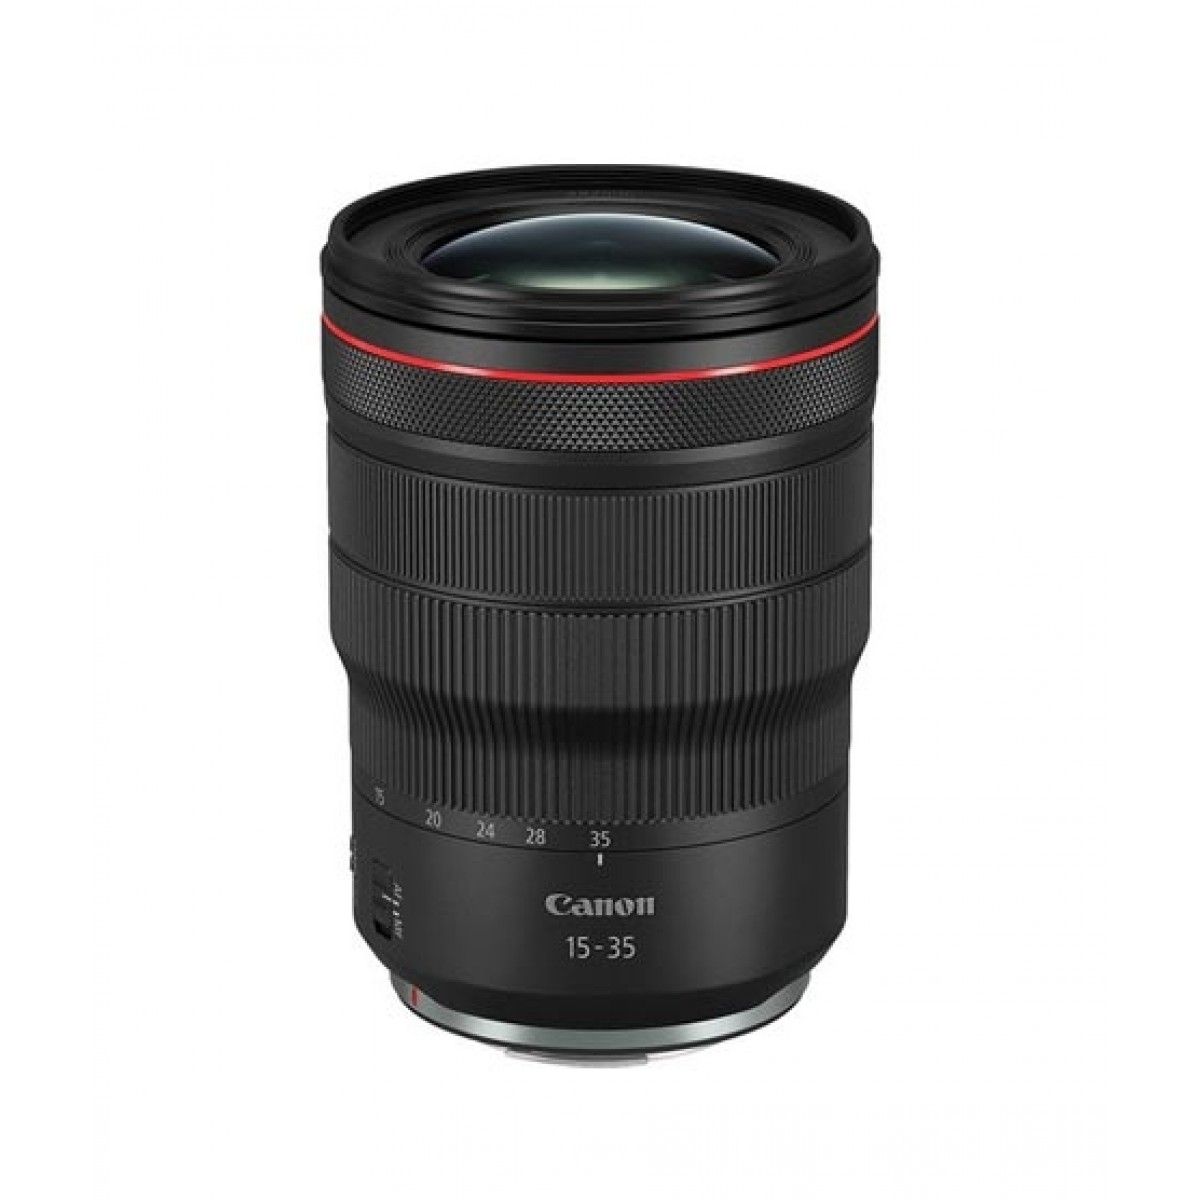 Canon RF 15-35mm f 2.8L IS USM Lens